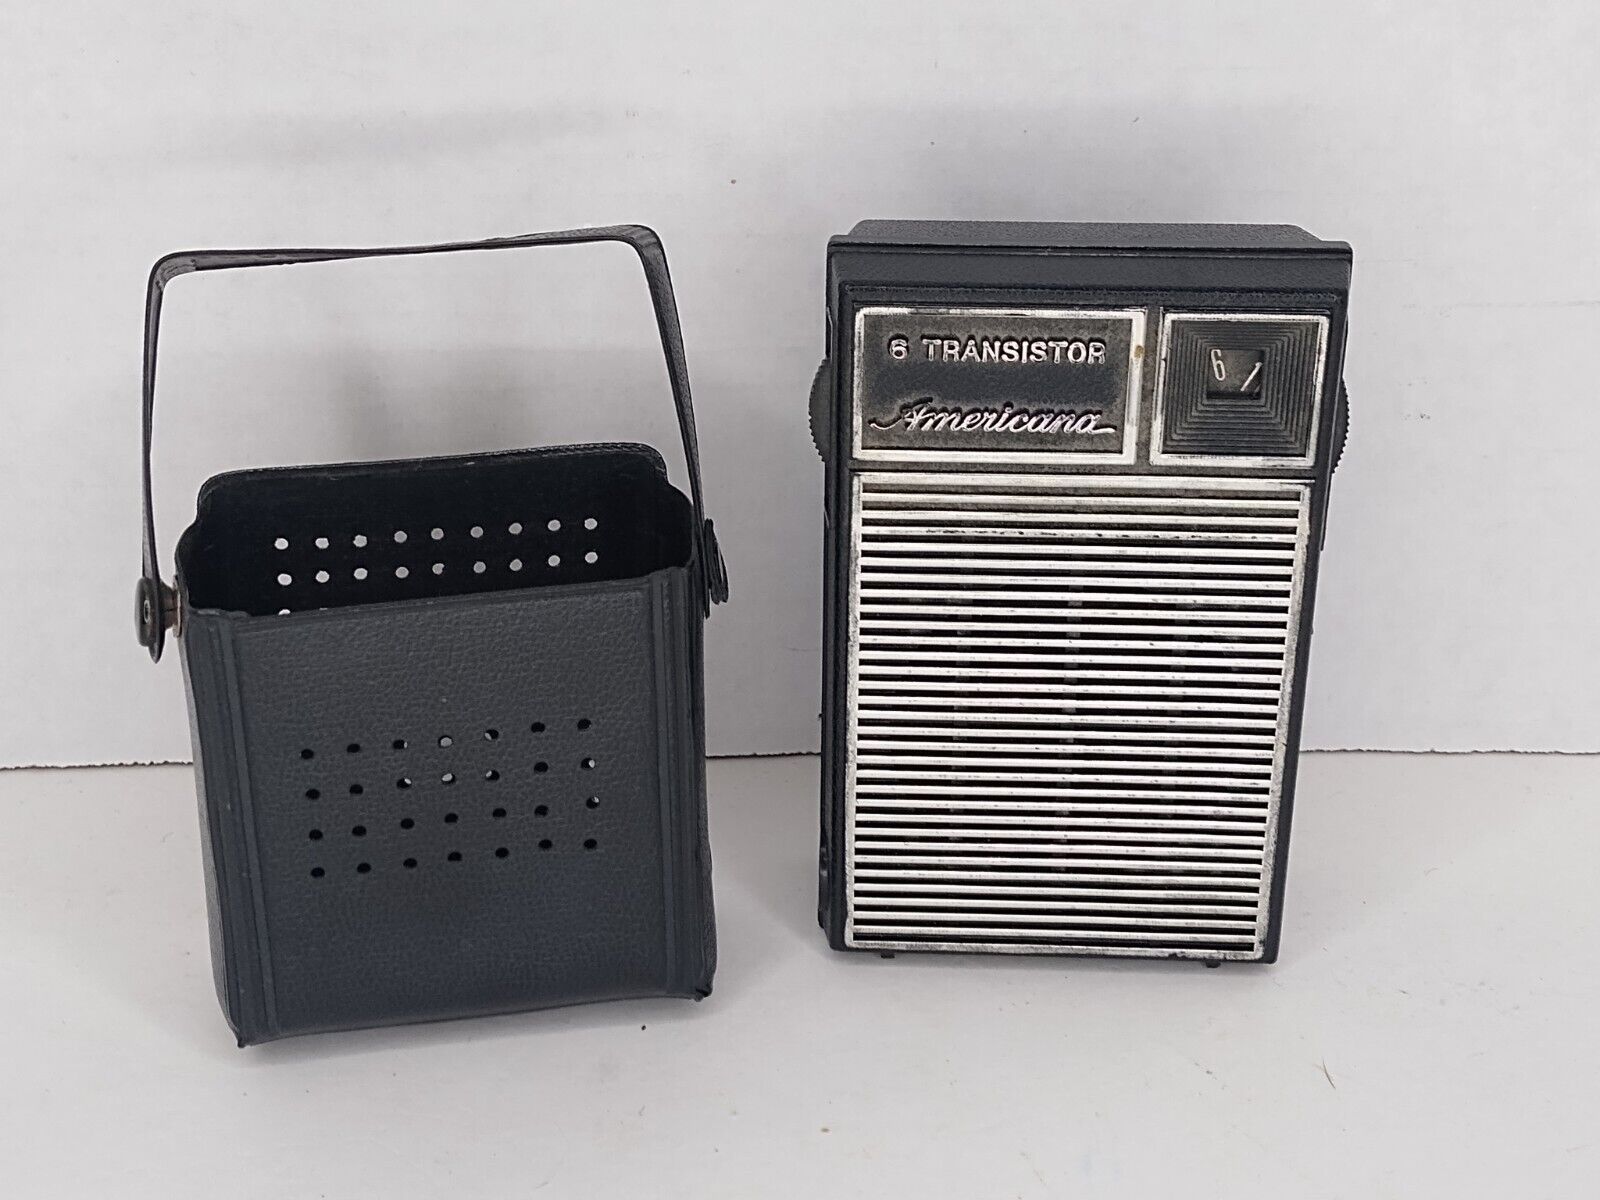 VTG Americana 6 Transistor Radio From Topp In Leather Case TESTED WORKS